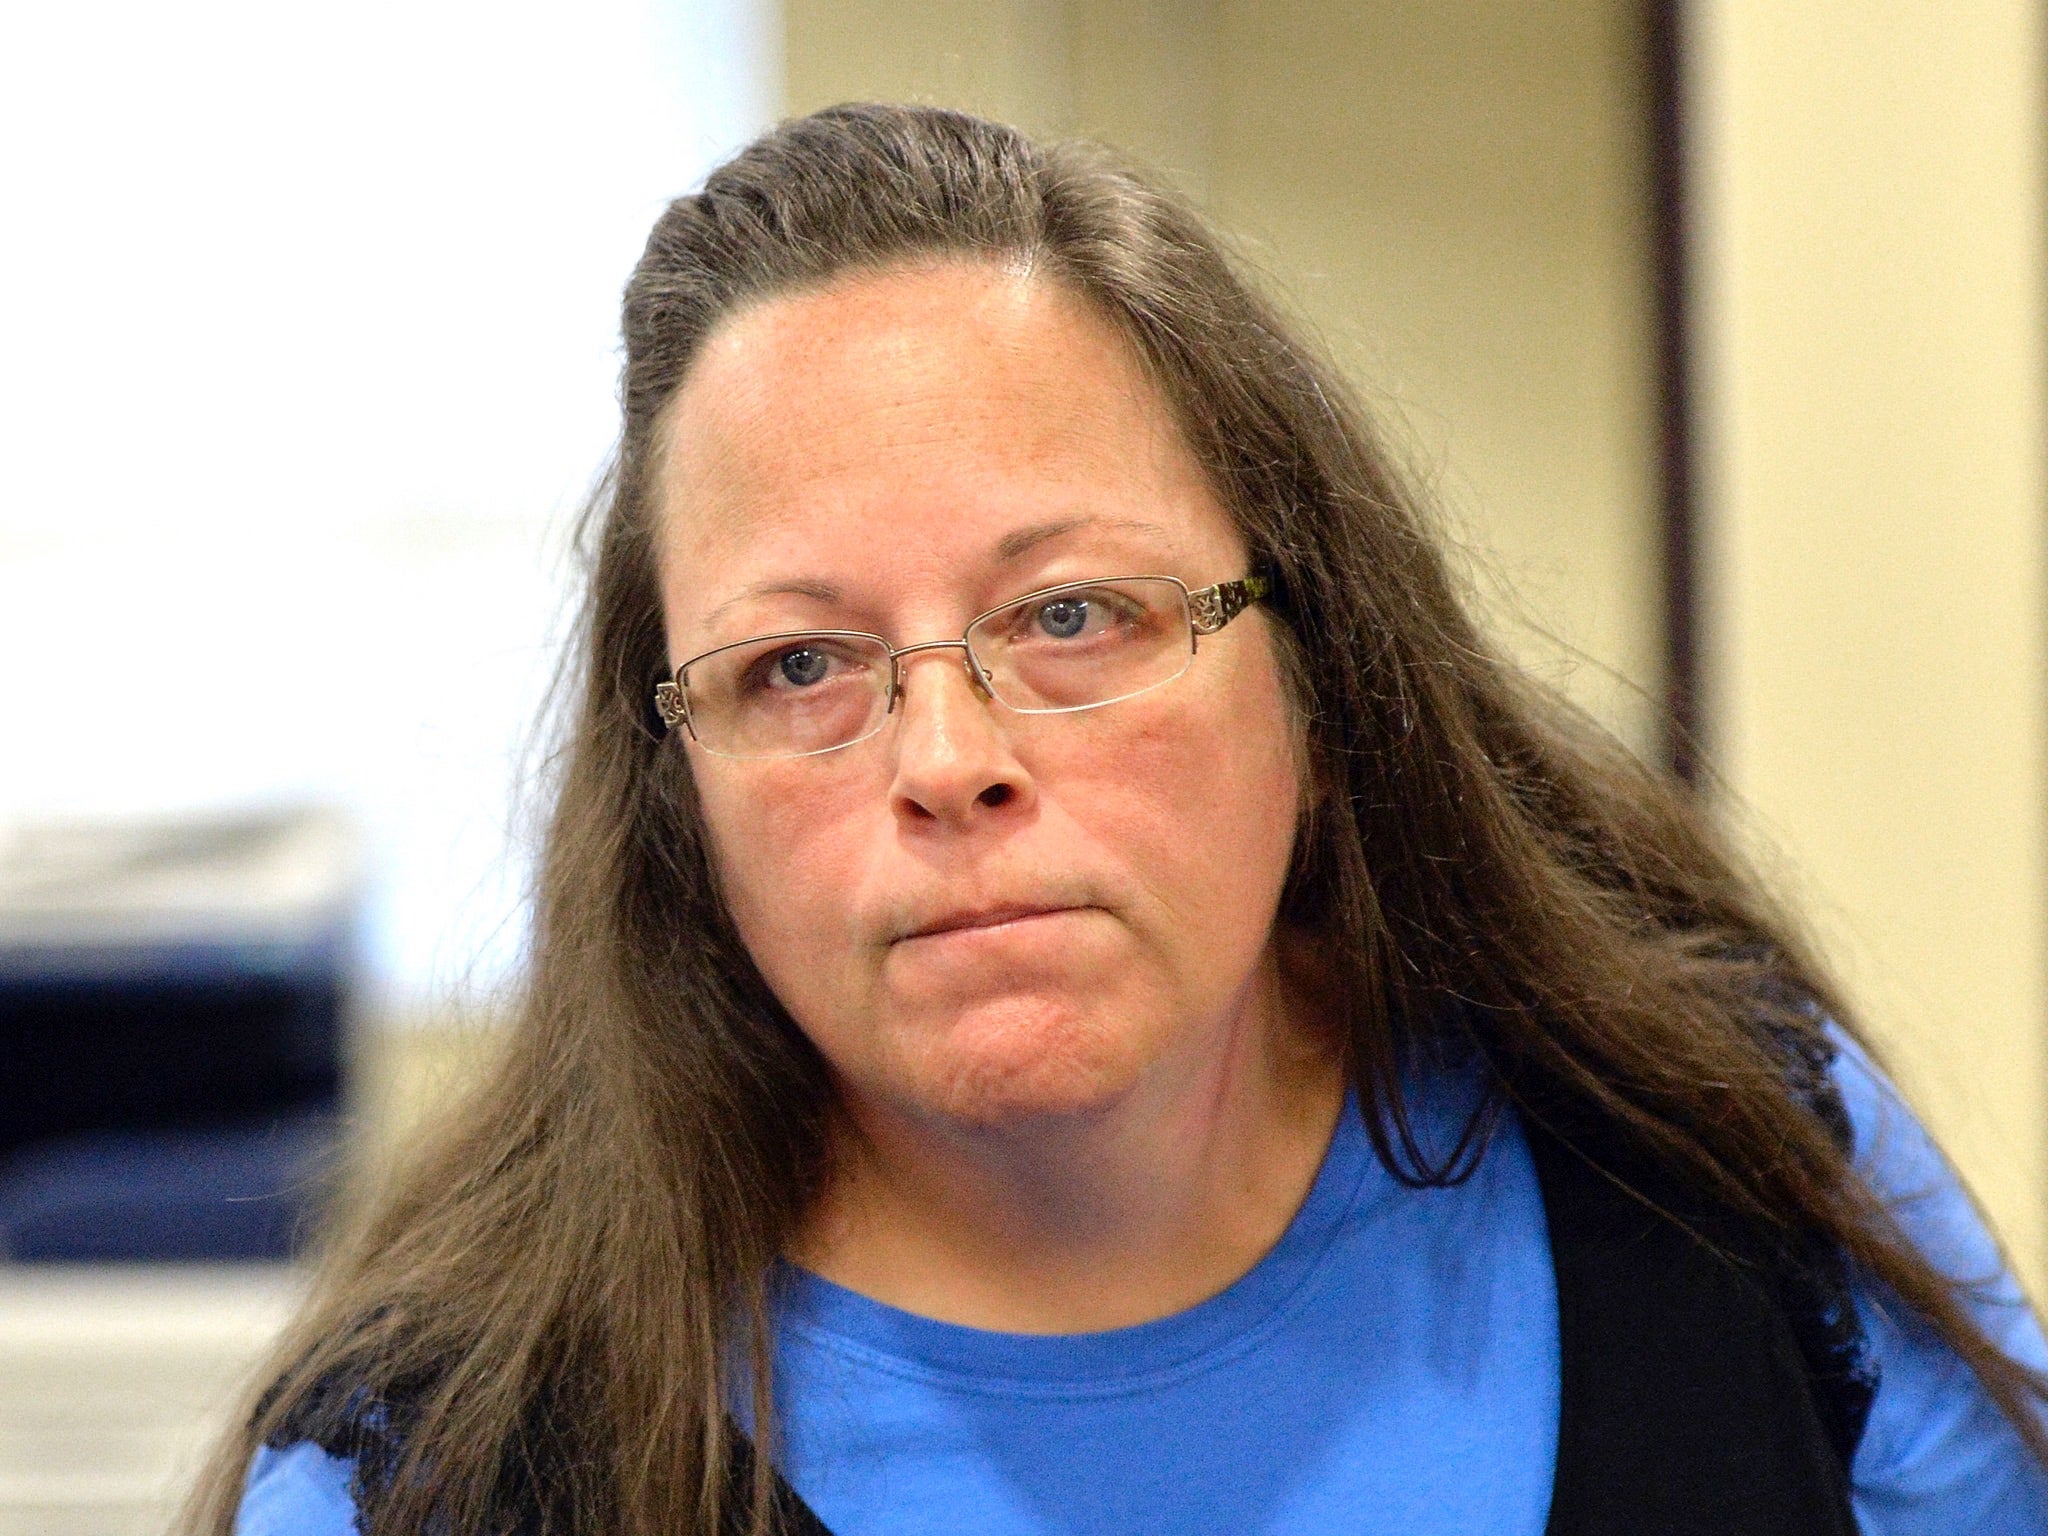 Kim Davis has become a hero of the Christian right